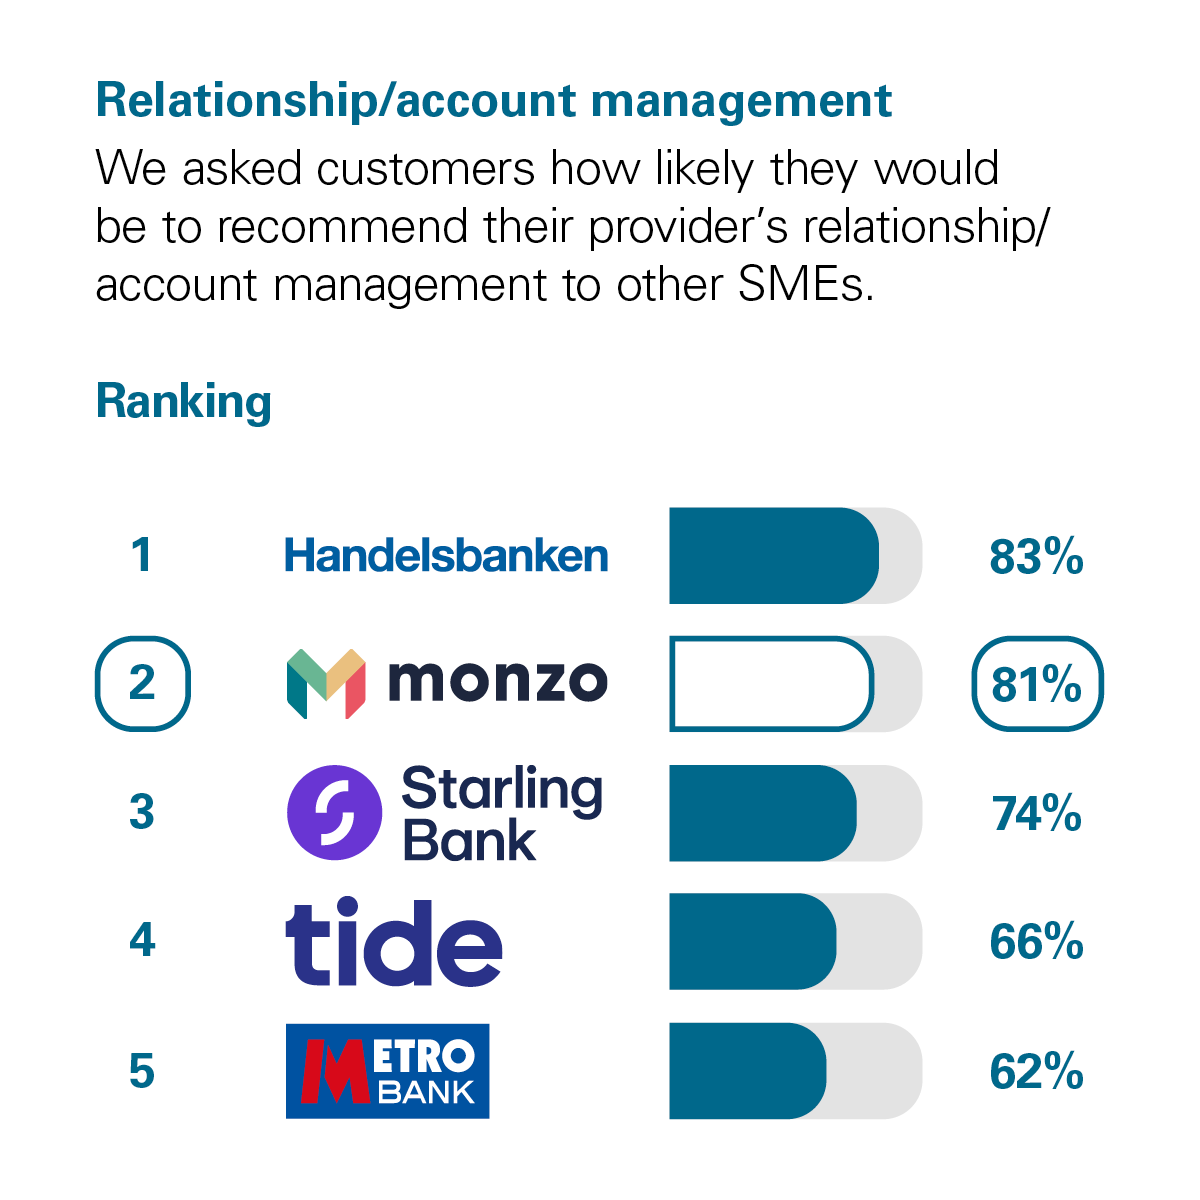 Graph showing the results of the CMA scoring of UK banks in the Relationship/Account Management category. The CMA asked customers how likely they would be to recommend their provider's account management services to other small and medium-sized enterprises (SMEs*). The rankings with percentage scores are: 1st Handelsbanken with 83%. 2nd Monzo with 81%. 3rd Starling Bank with 74%. 4th Tide with 66%. 5th Metro Bank with 62%.